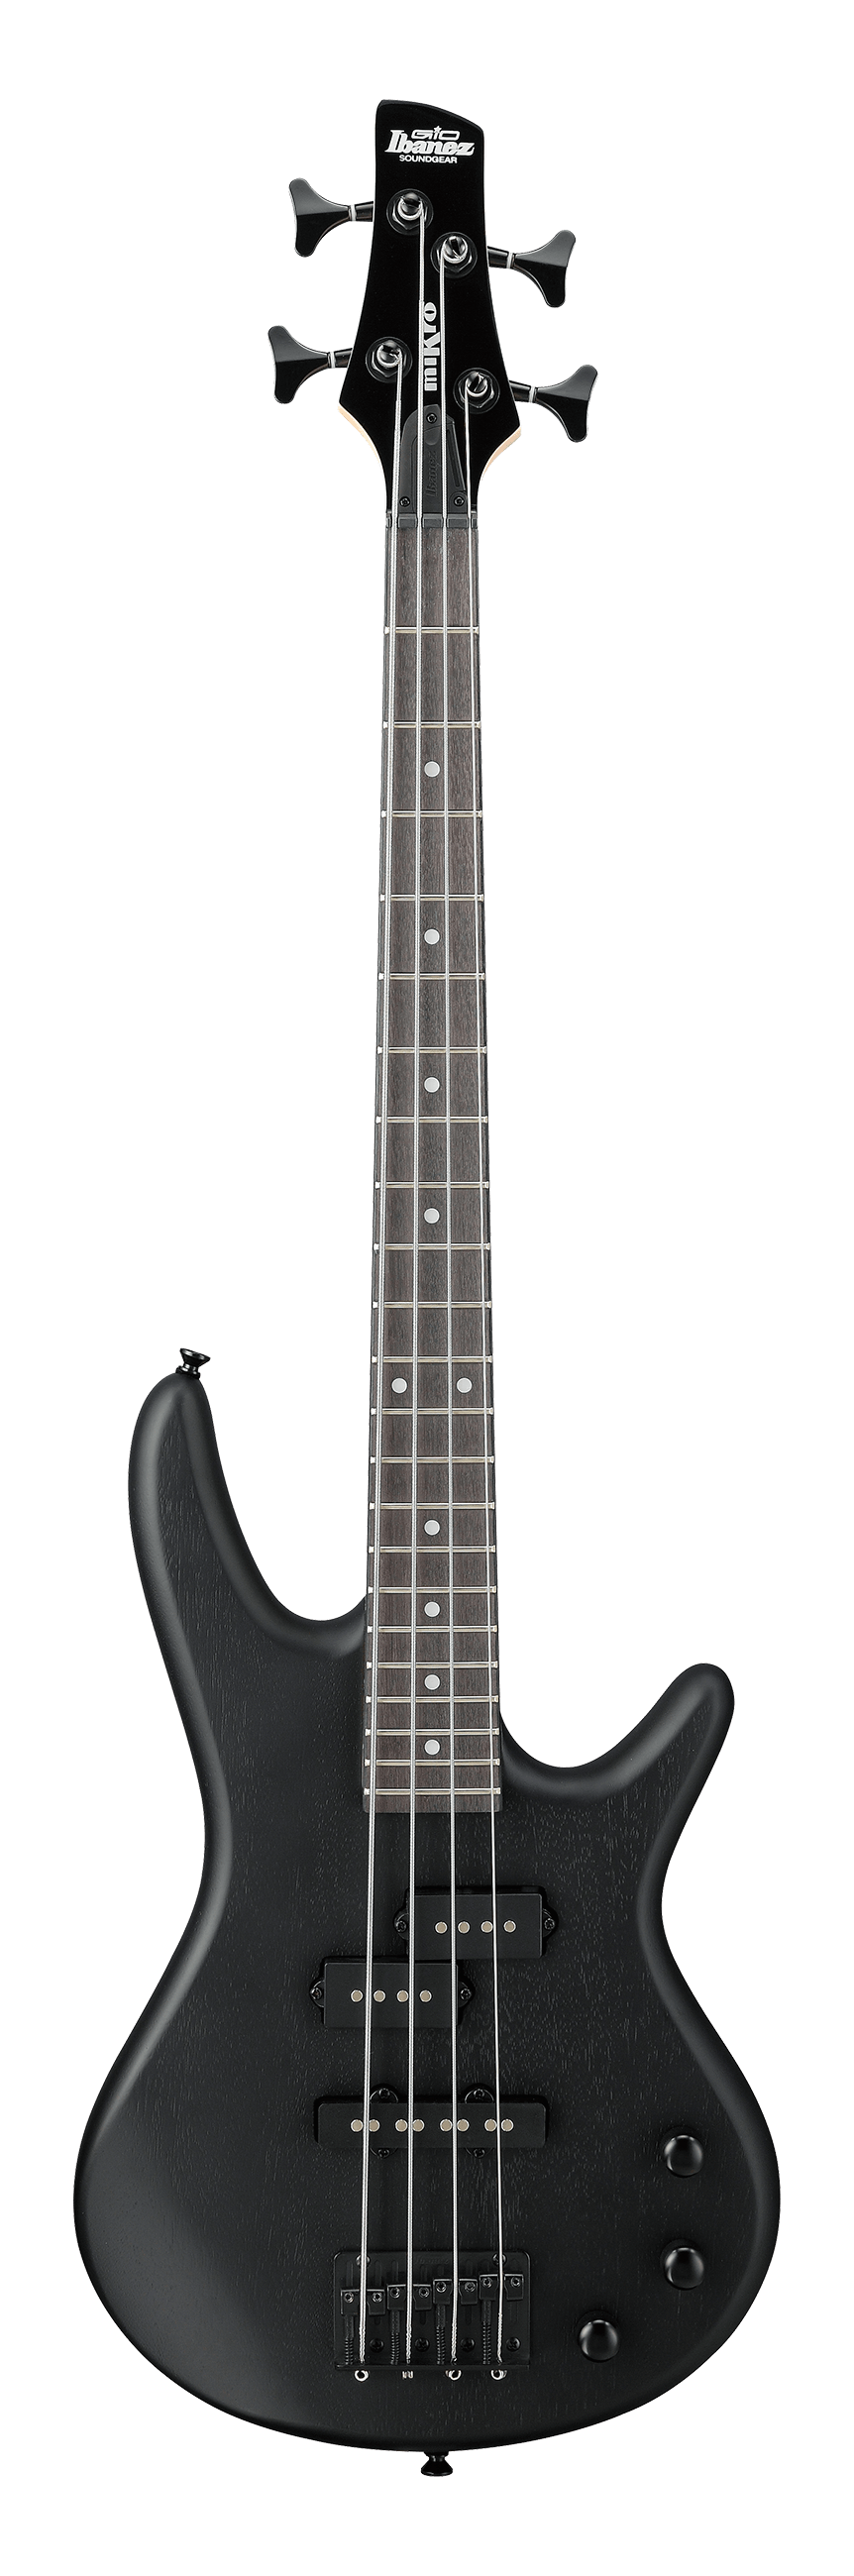 IBANEZ GIO Series miKro GSRM20B compact Electric Bass Guitar, 4-String (WK : Weathered Black)